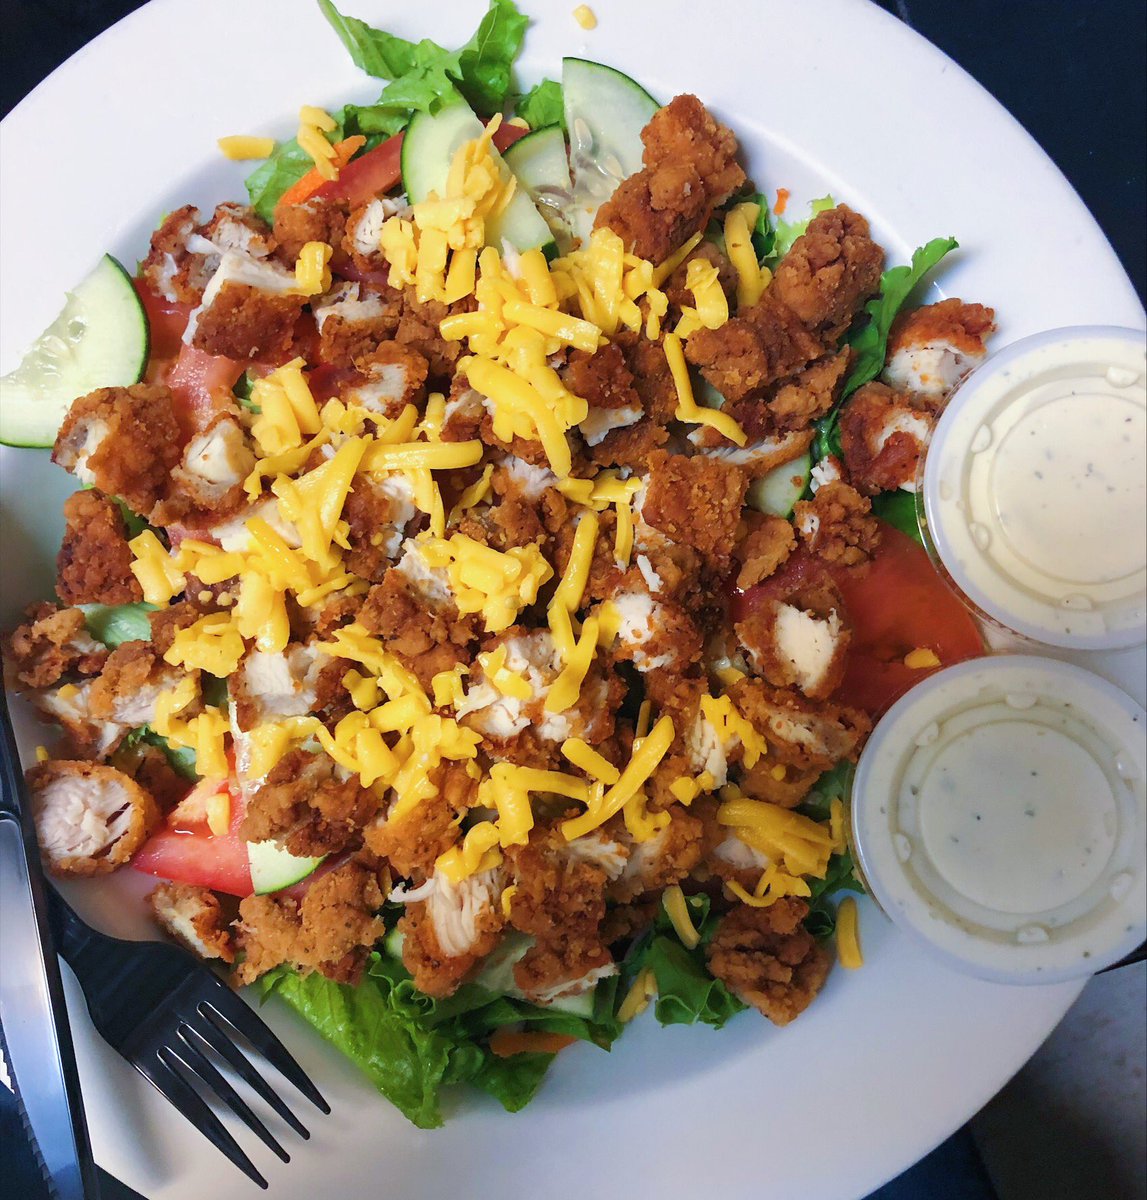 Fried chicken salad! 🥗 #rgvfoodie #rgvfood